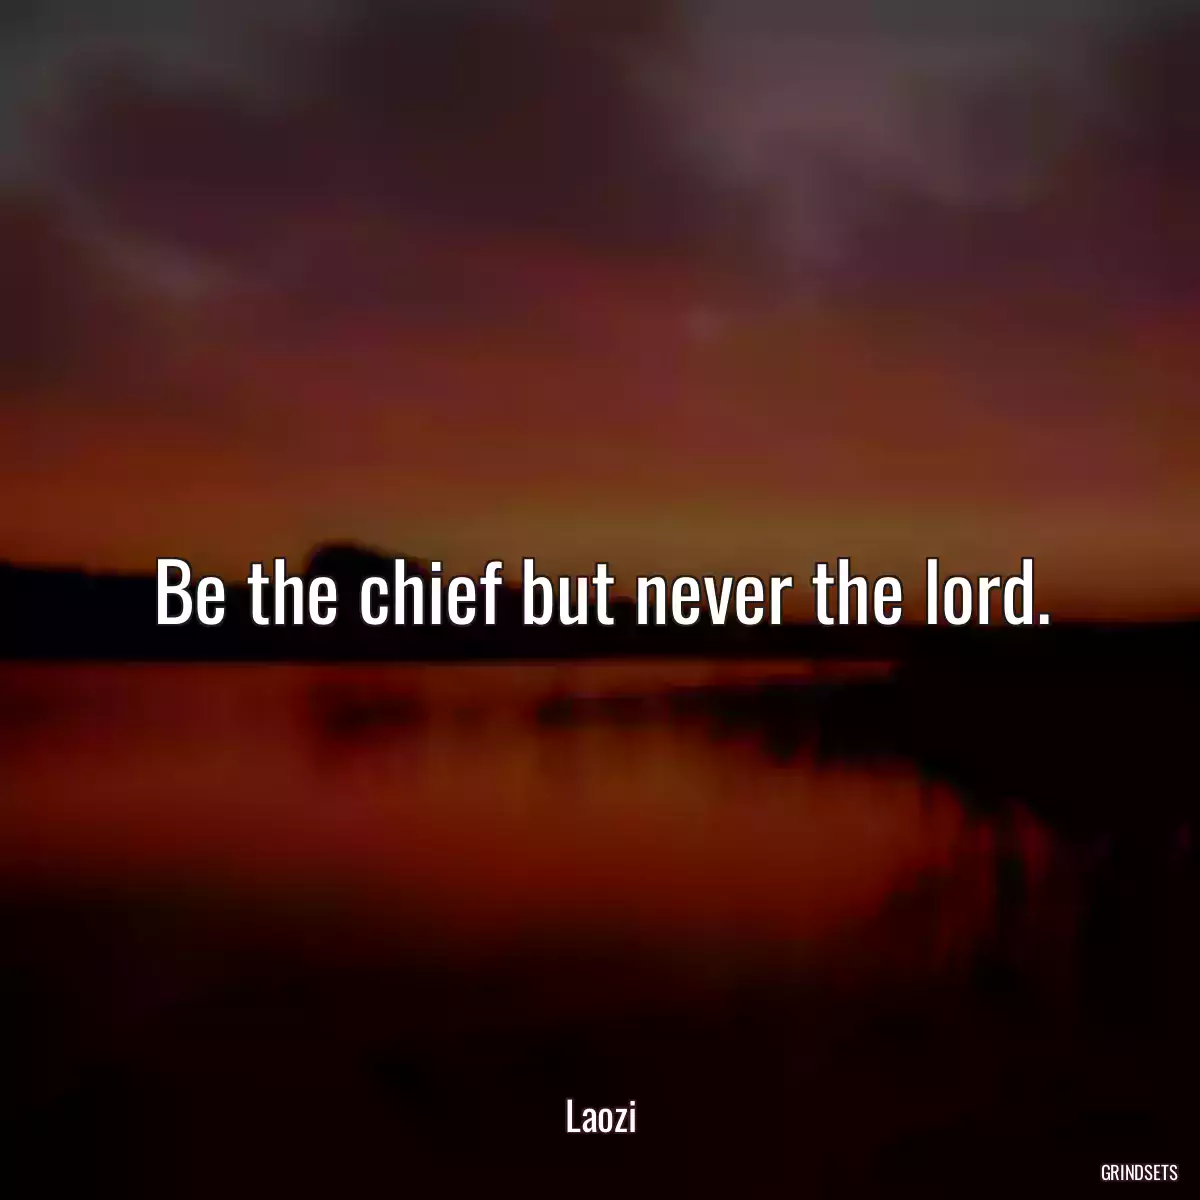 Be the chief but never the lord.